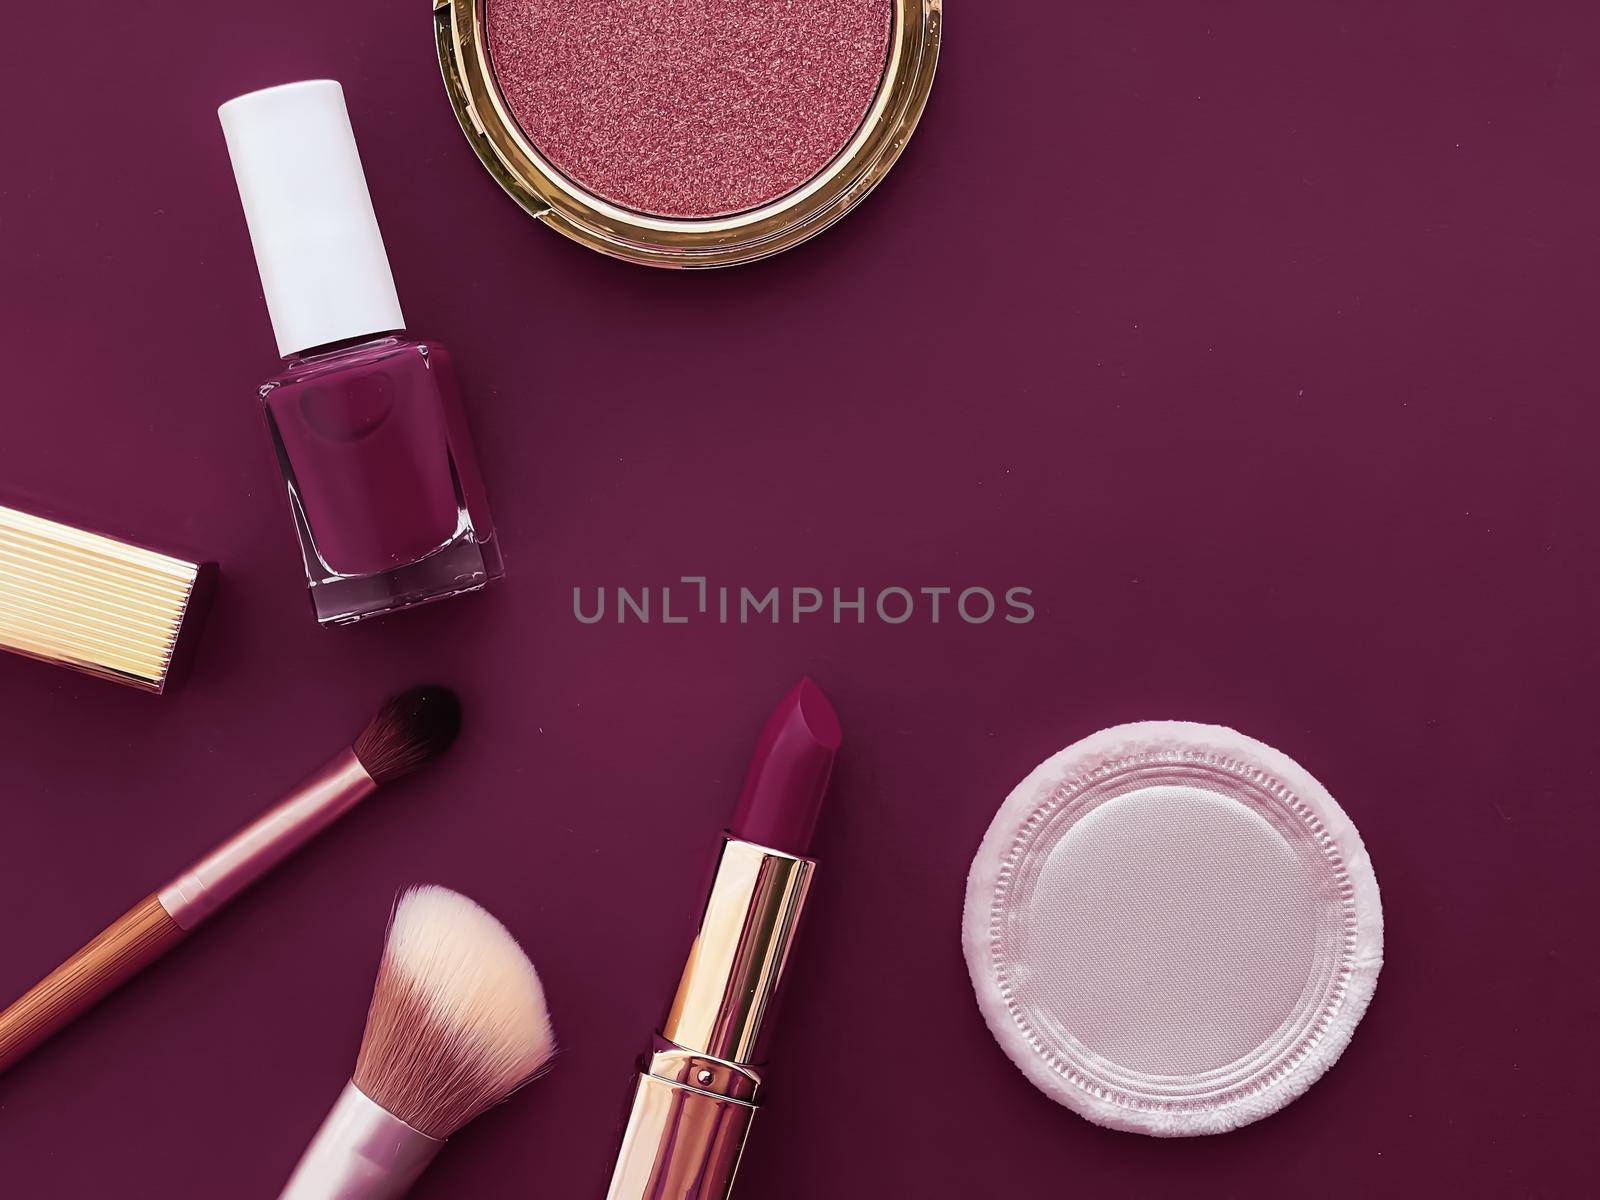 Beauty, make-up and cosmetics flatlay design with copyspace, cosmetic products and makeup tools on purple background, girly and feminine style by Anneleven